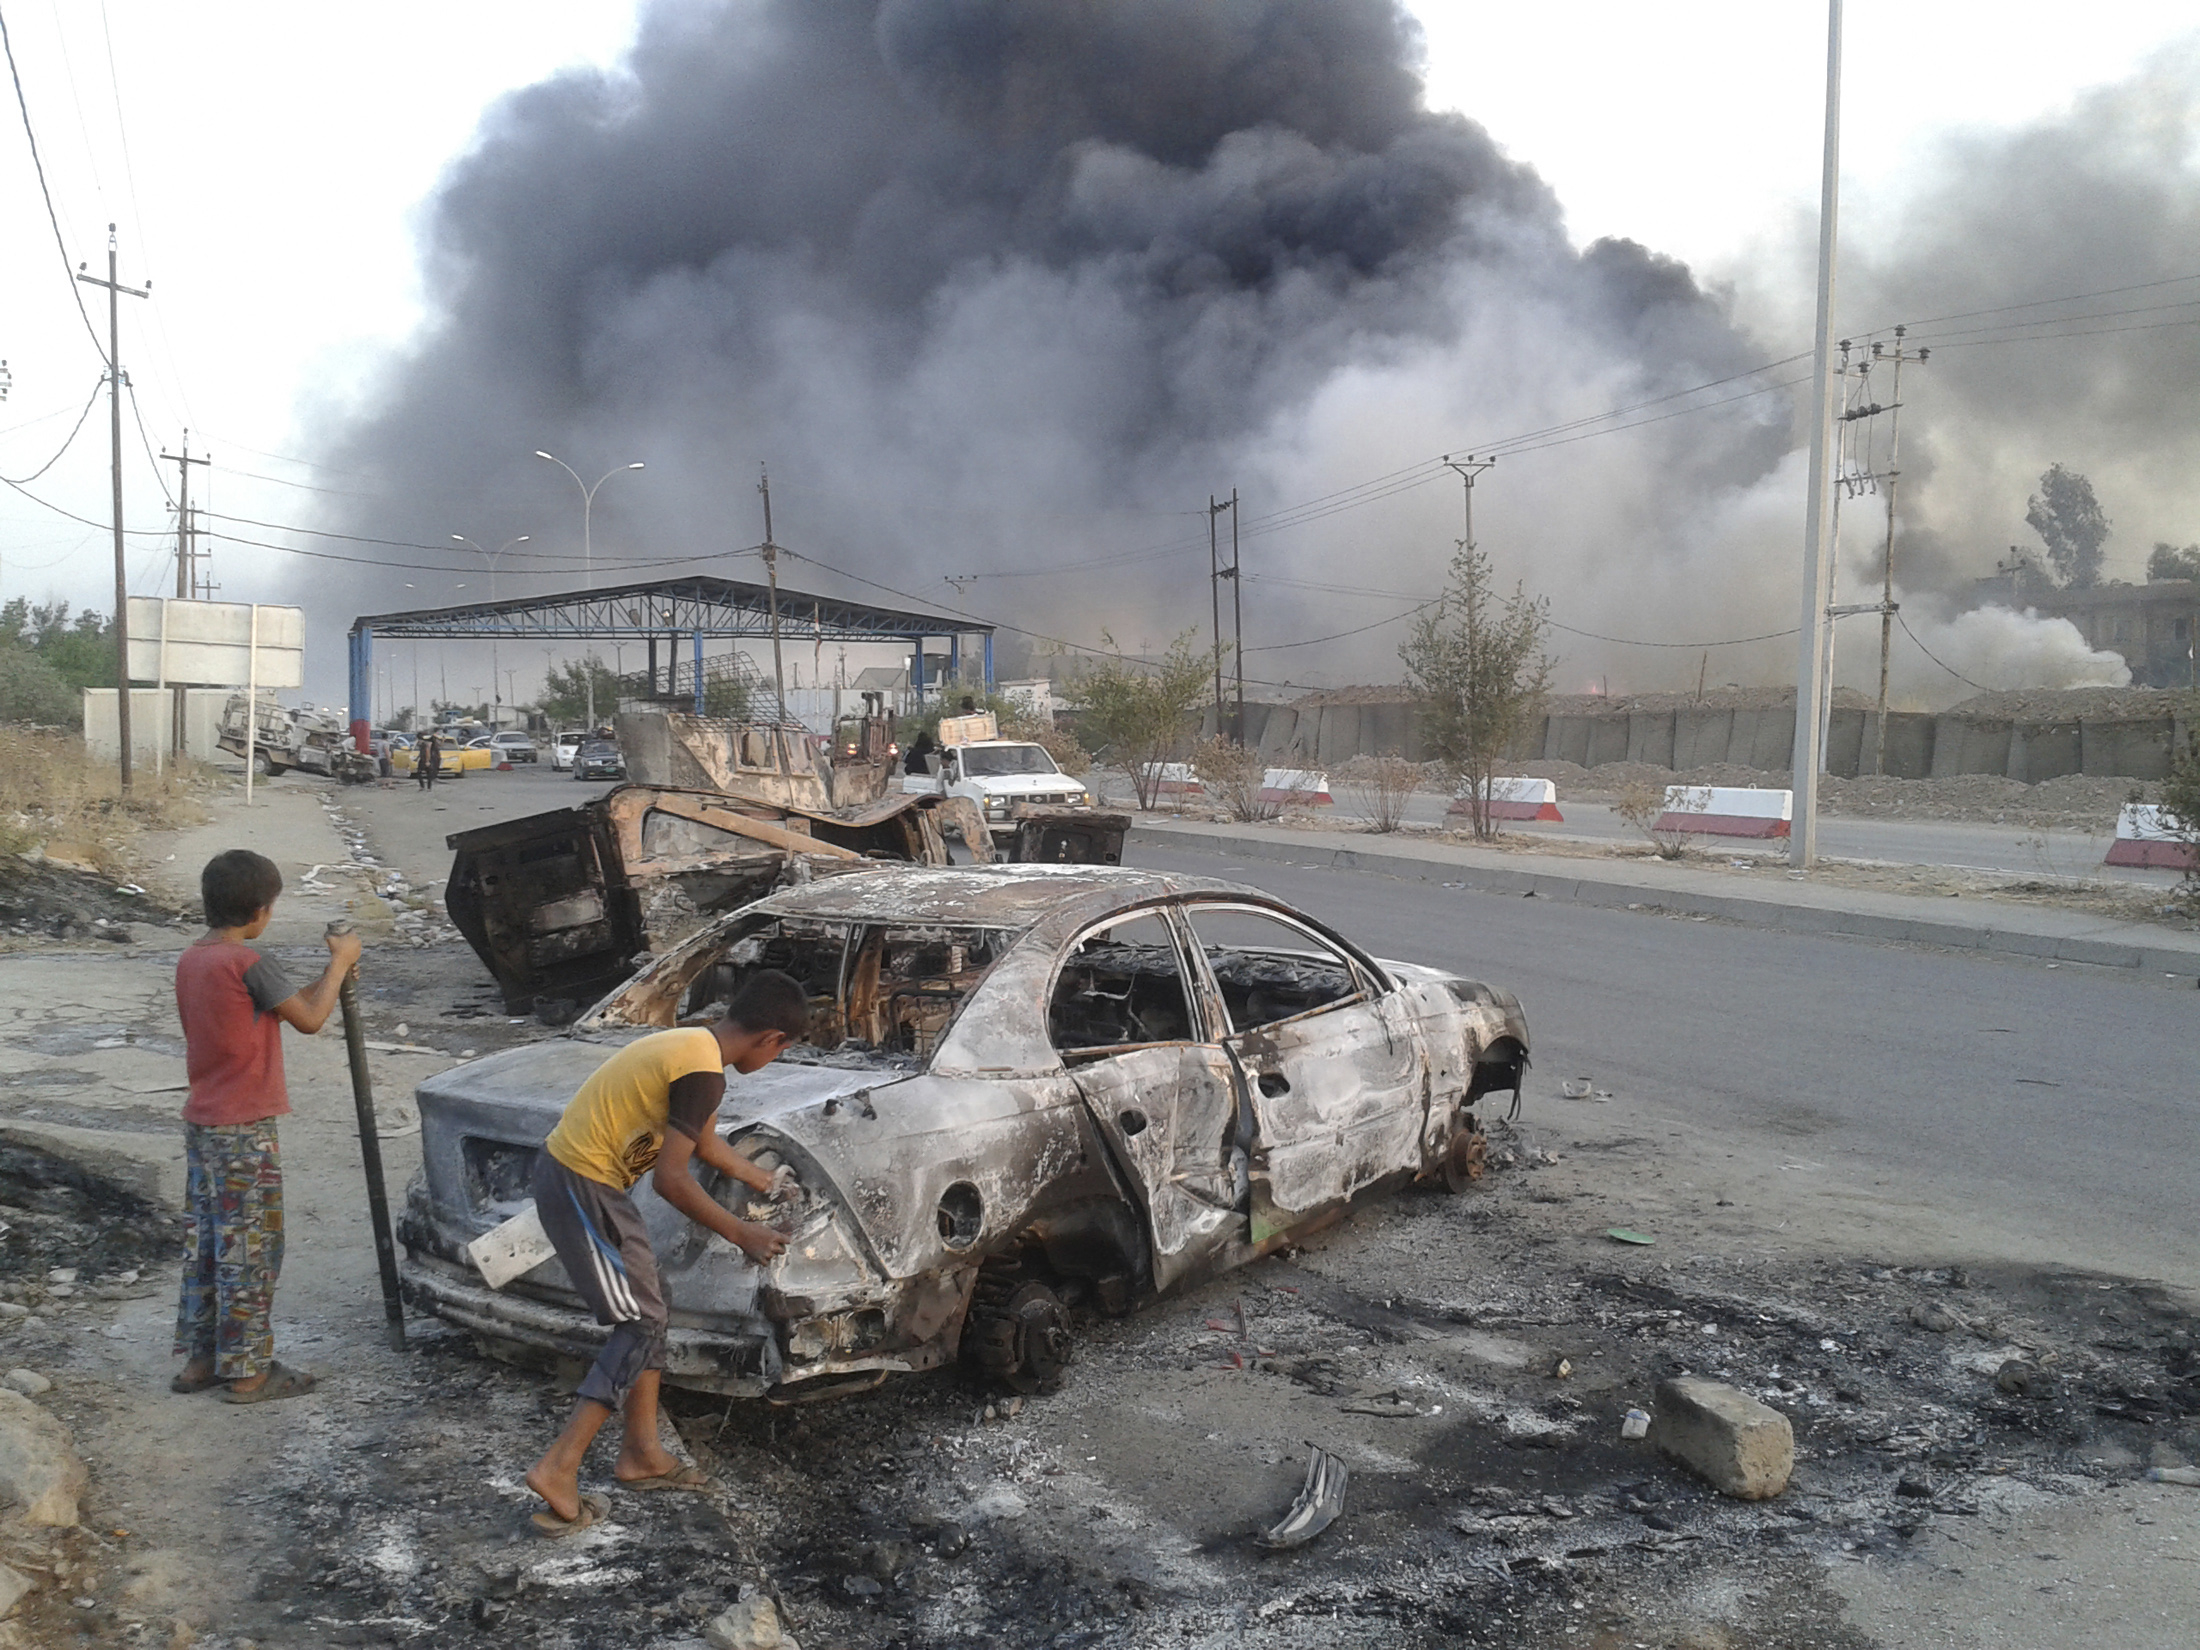 Civilian children stand next to a burnt vehicle during clashes between Iraqi security forces and al Qaeda-linked Islamic State in Iraq and the Levant (ISIL) in the northern Iraq city of Mosul